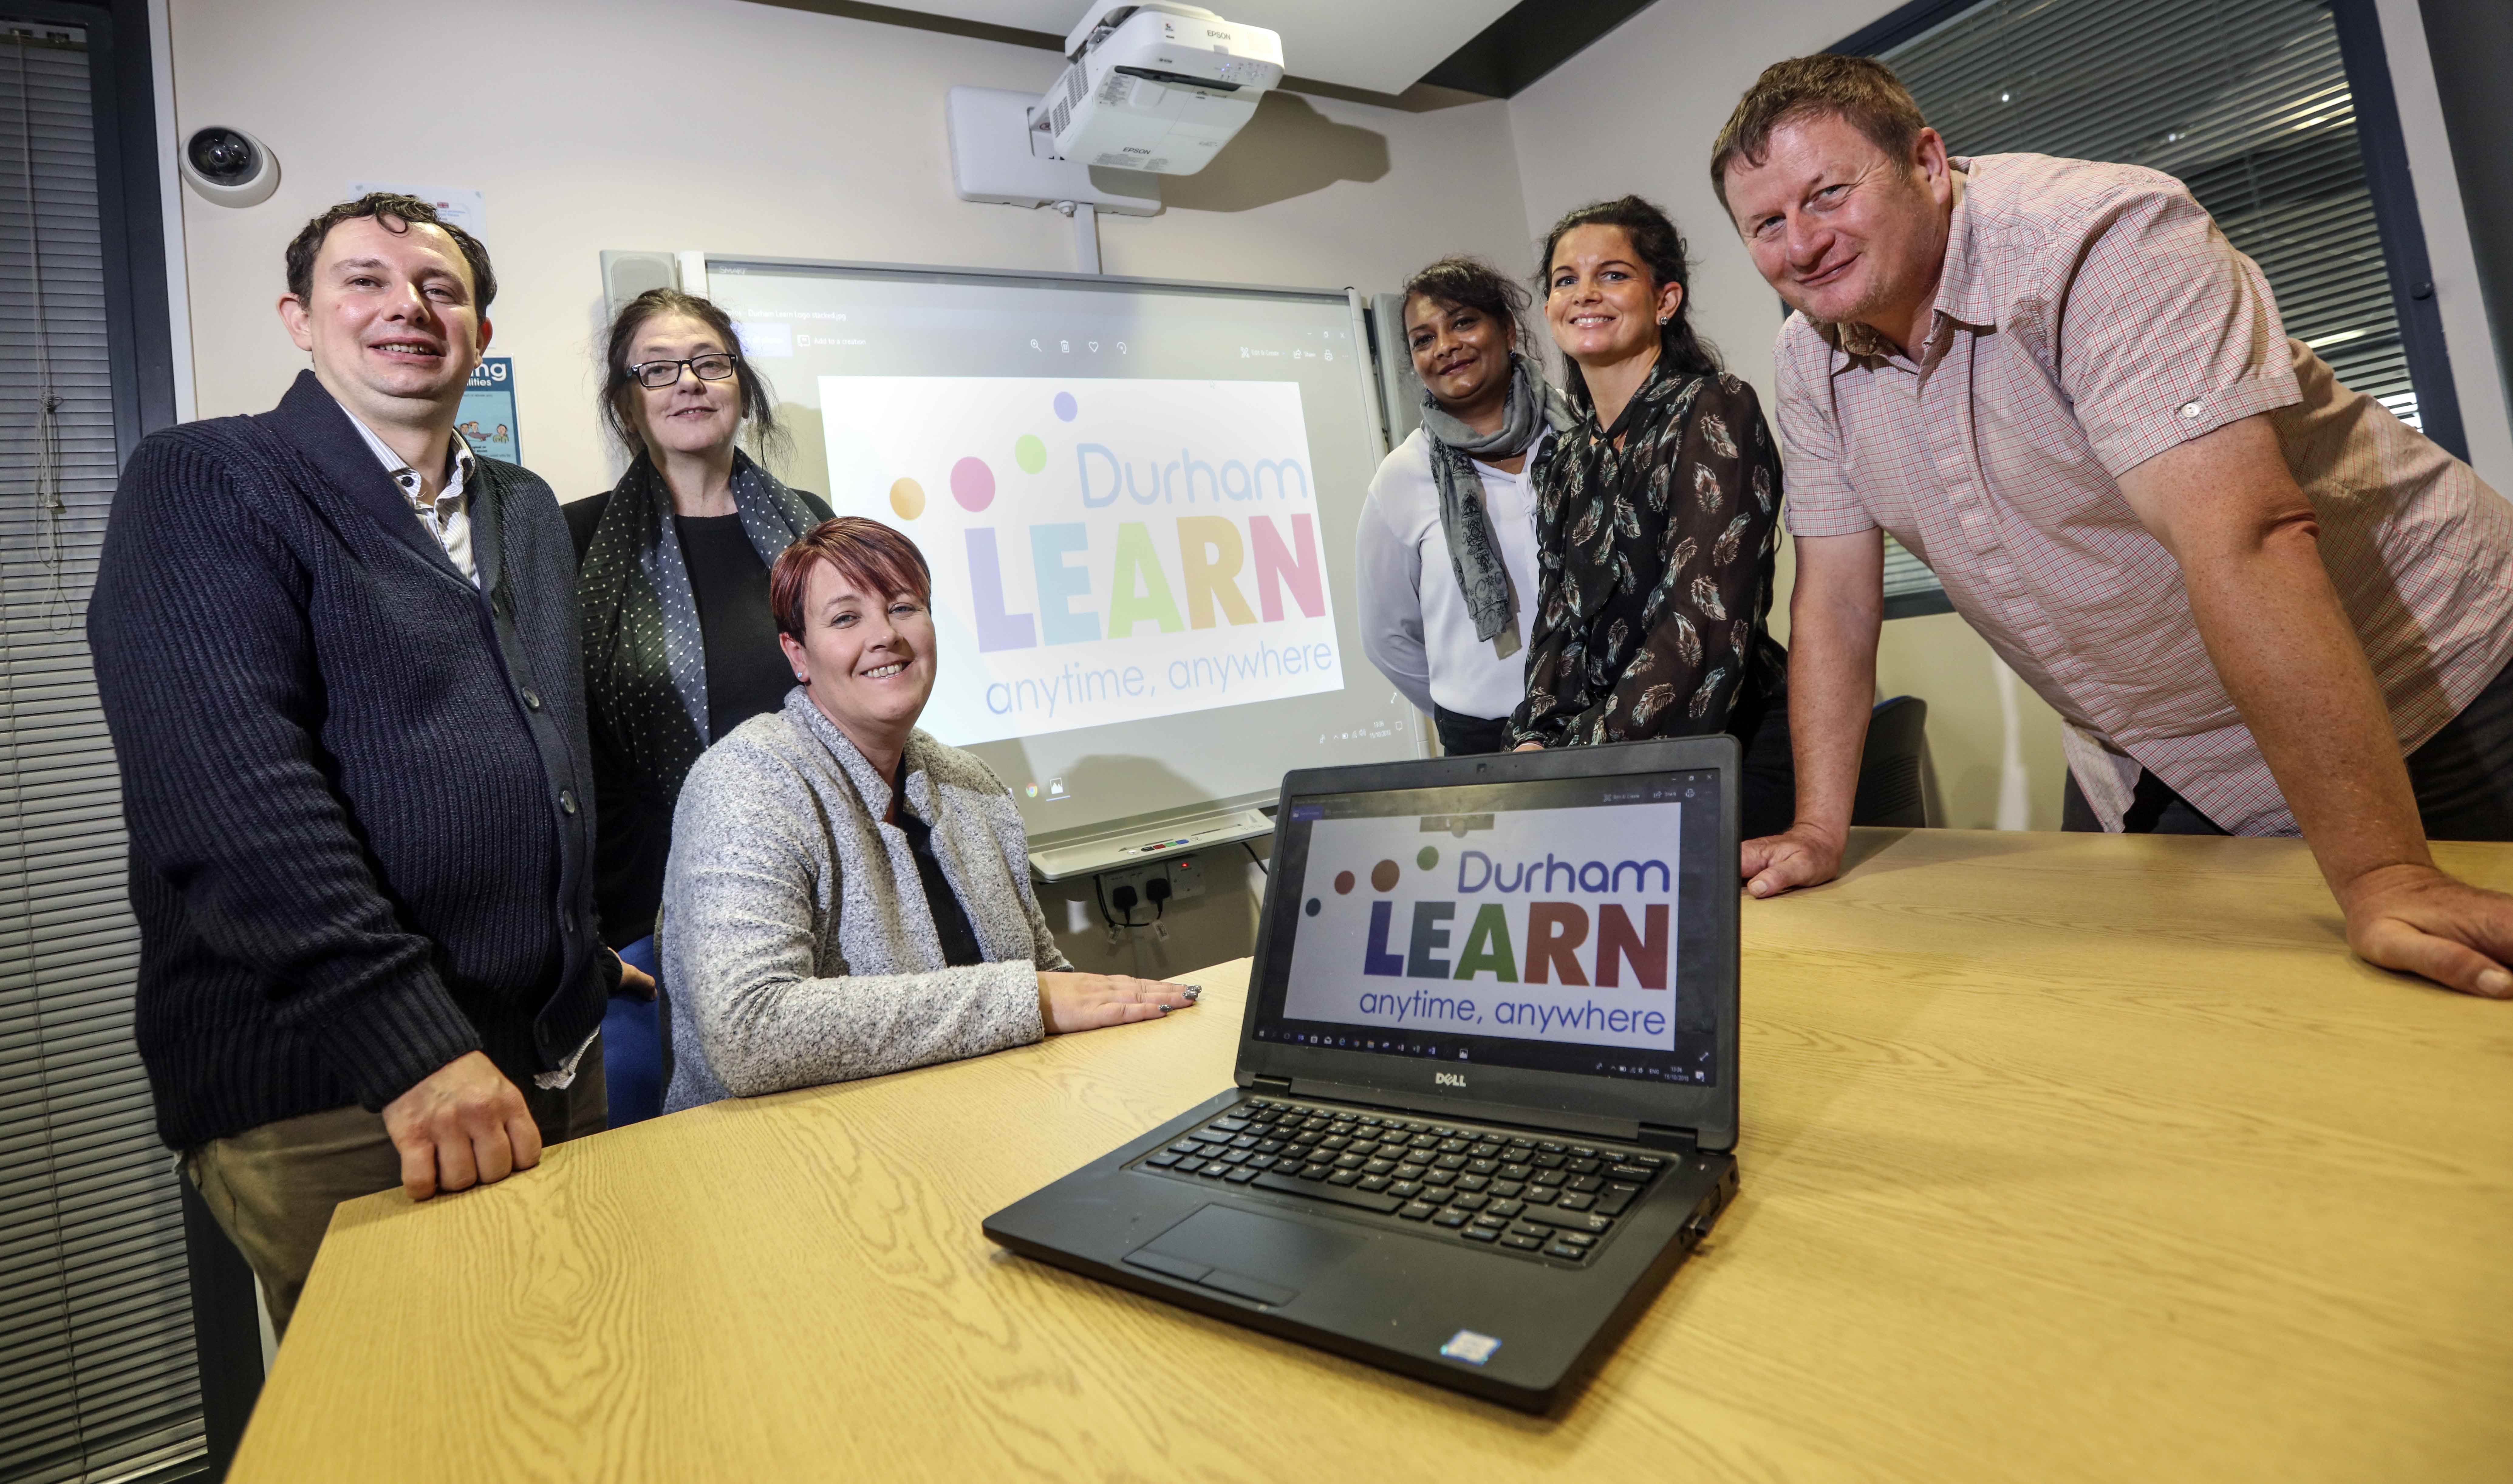 Transform Adult Learning Across County